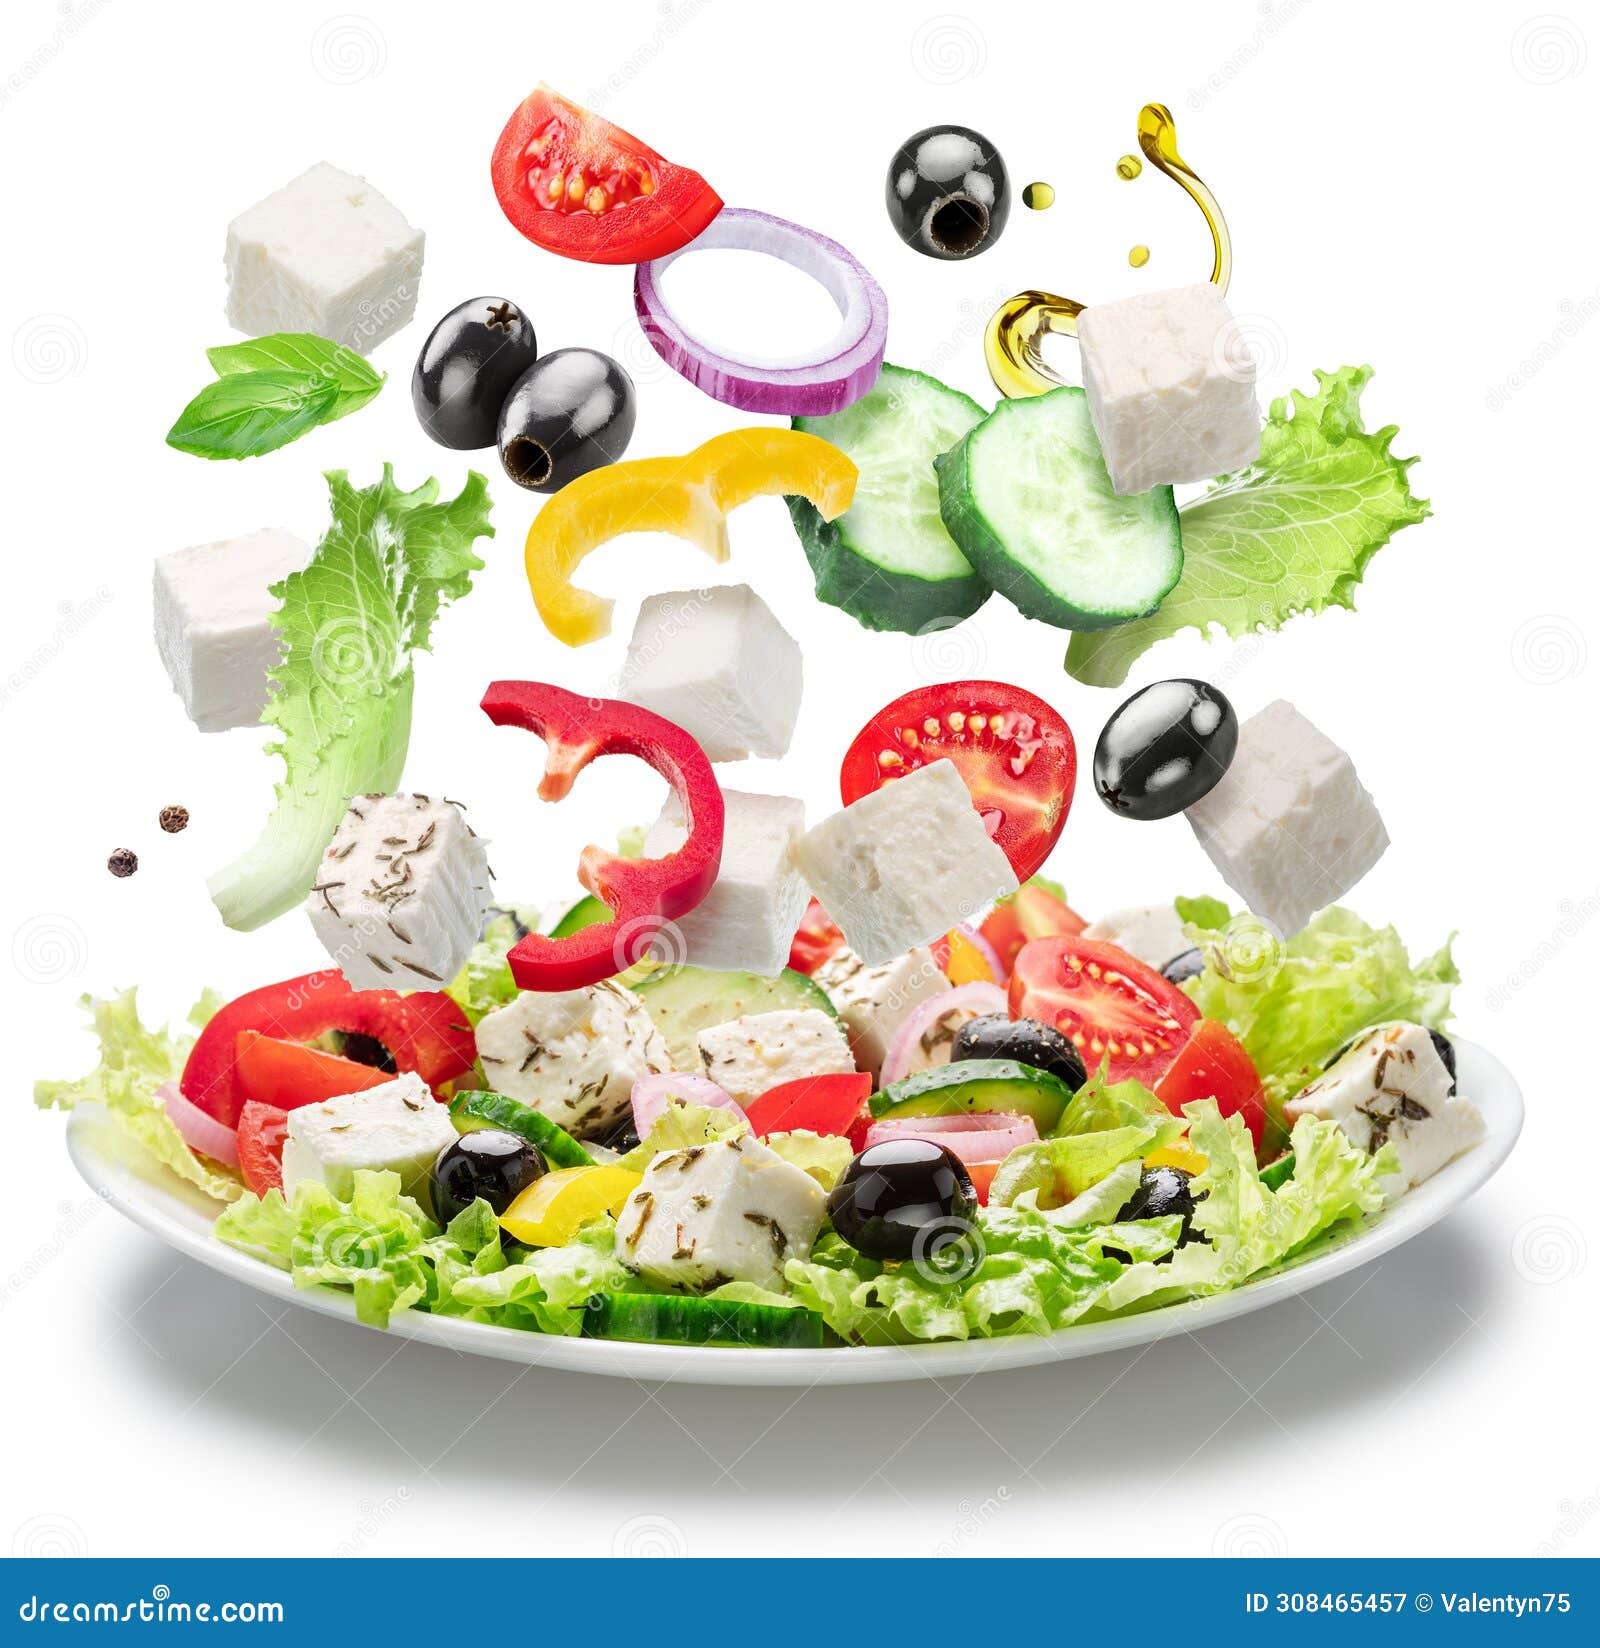 fresh vegetables and feta cheese falling down into the white plate . file contains clipping paths